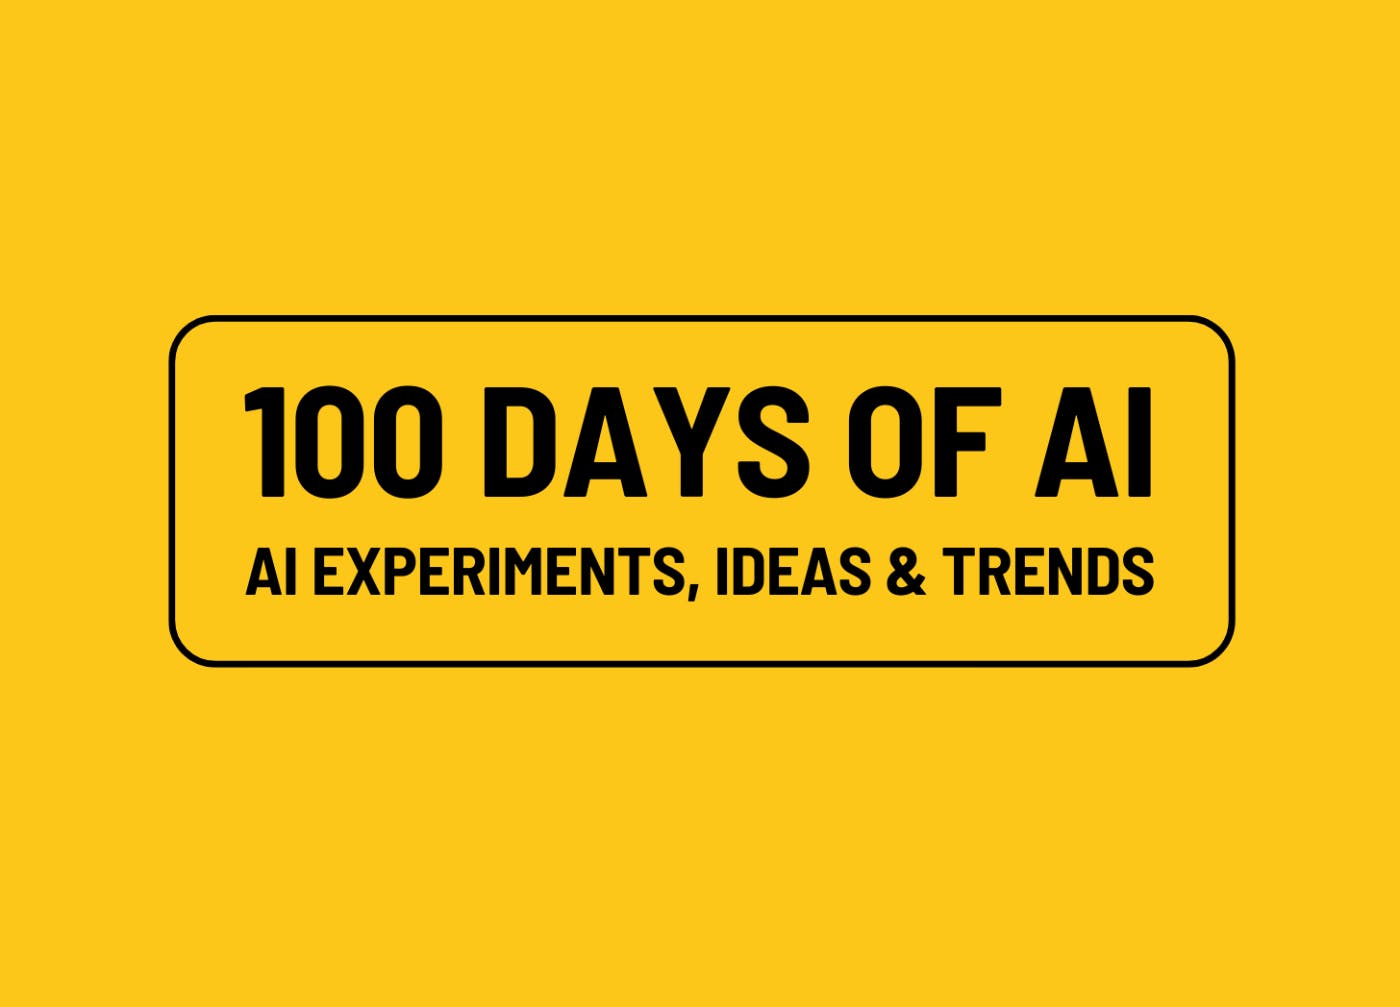 https://cdn.aisys.pro/stories/100-days-of-ai-day-9-can-ai-generate-a-swot-analysis-for-your-business-idea.jpg